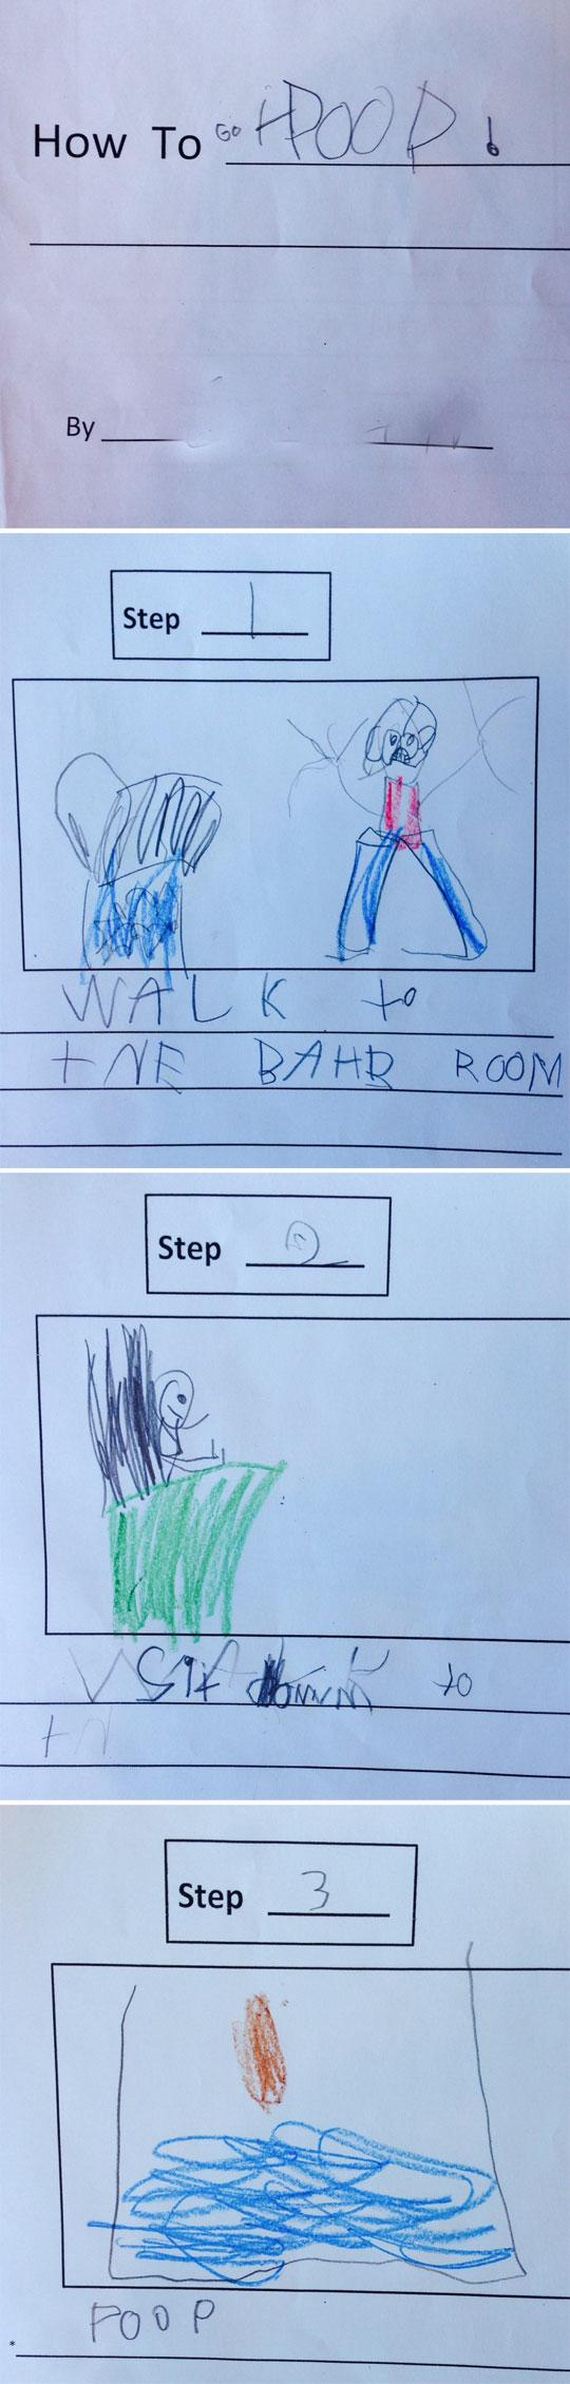 funny-written-notes-kids